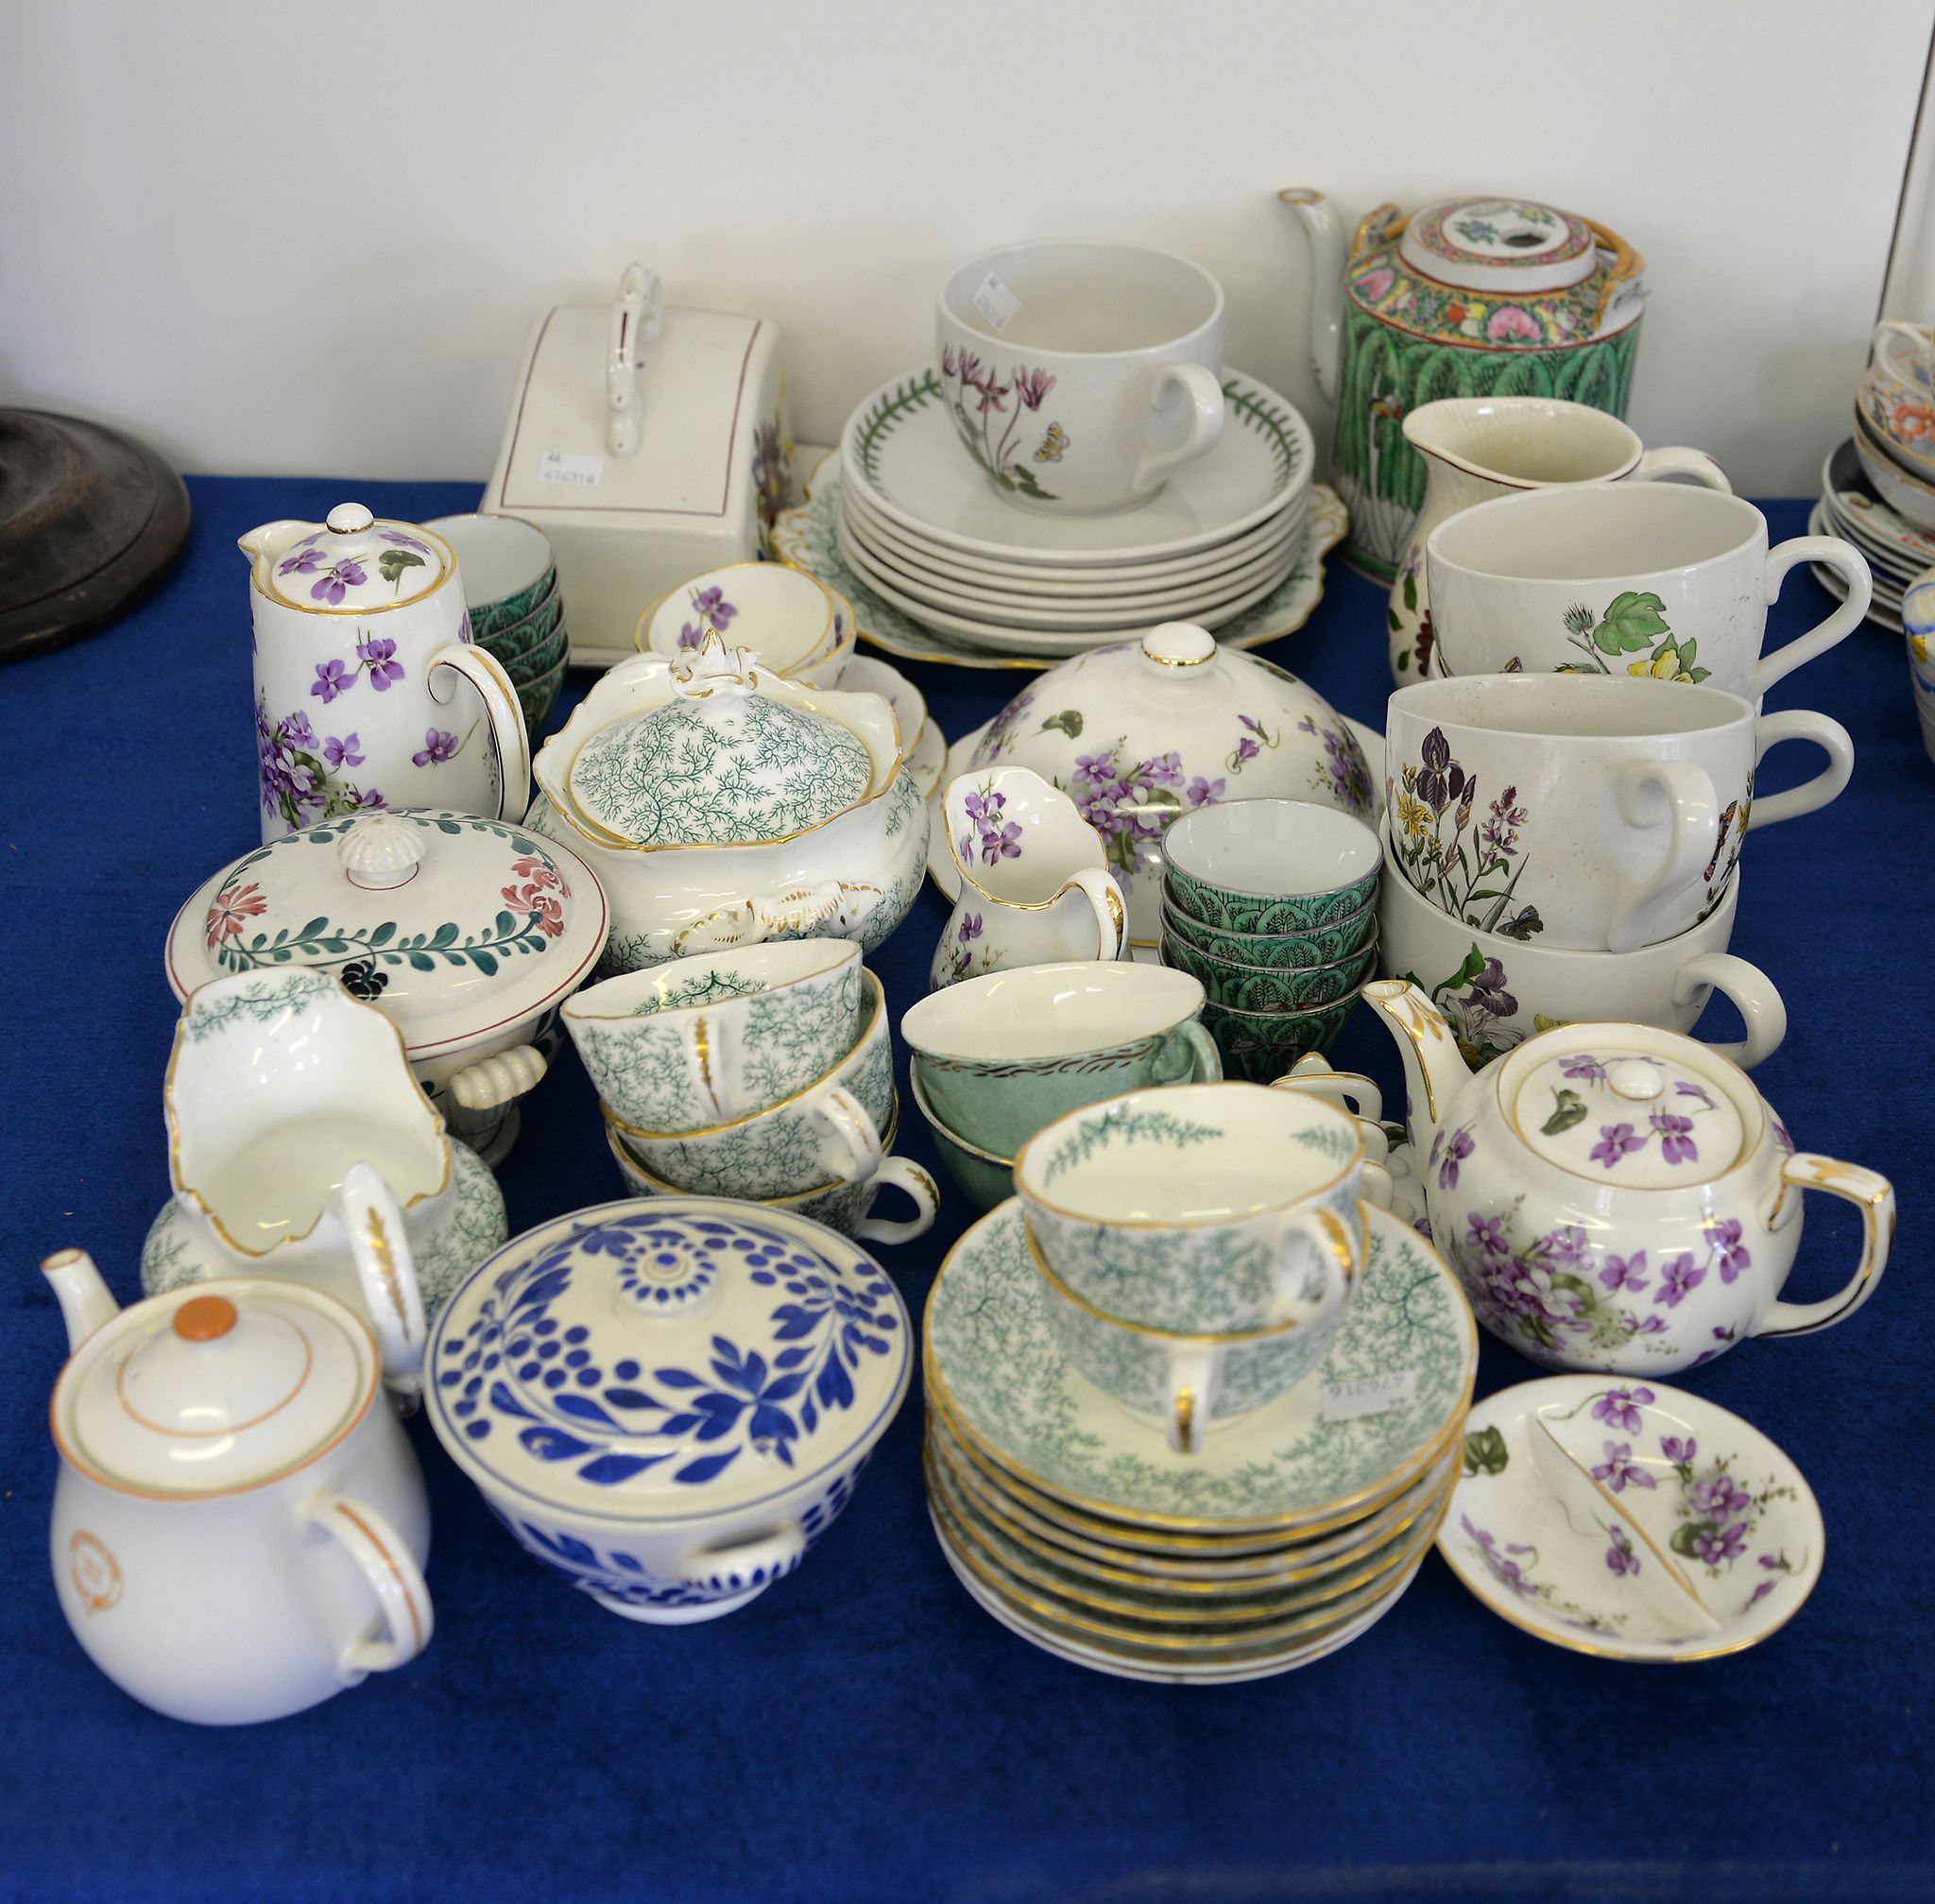 An assortment of mostly English pottery and porcelain teawares, including a modern Cantonese tea pot